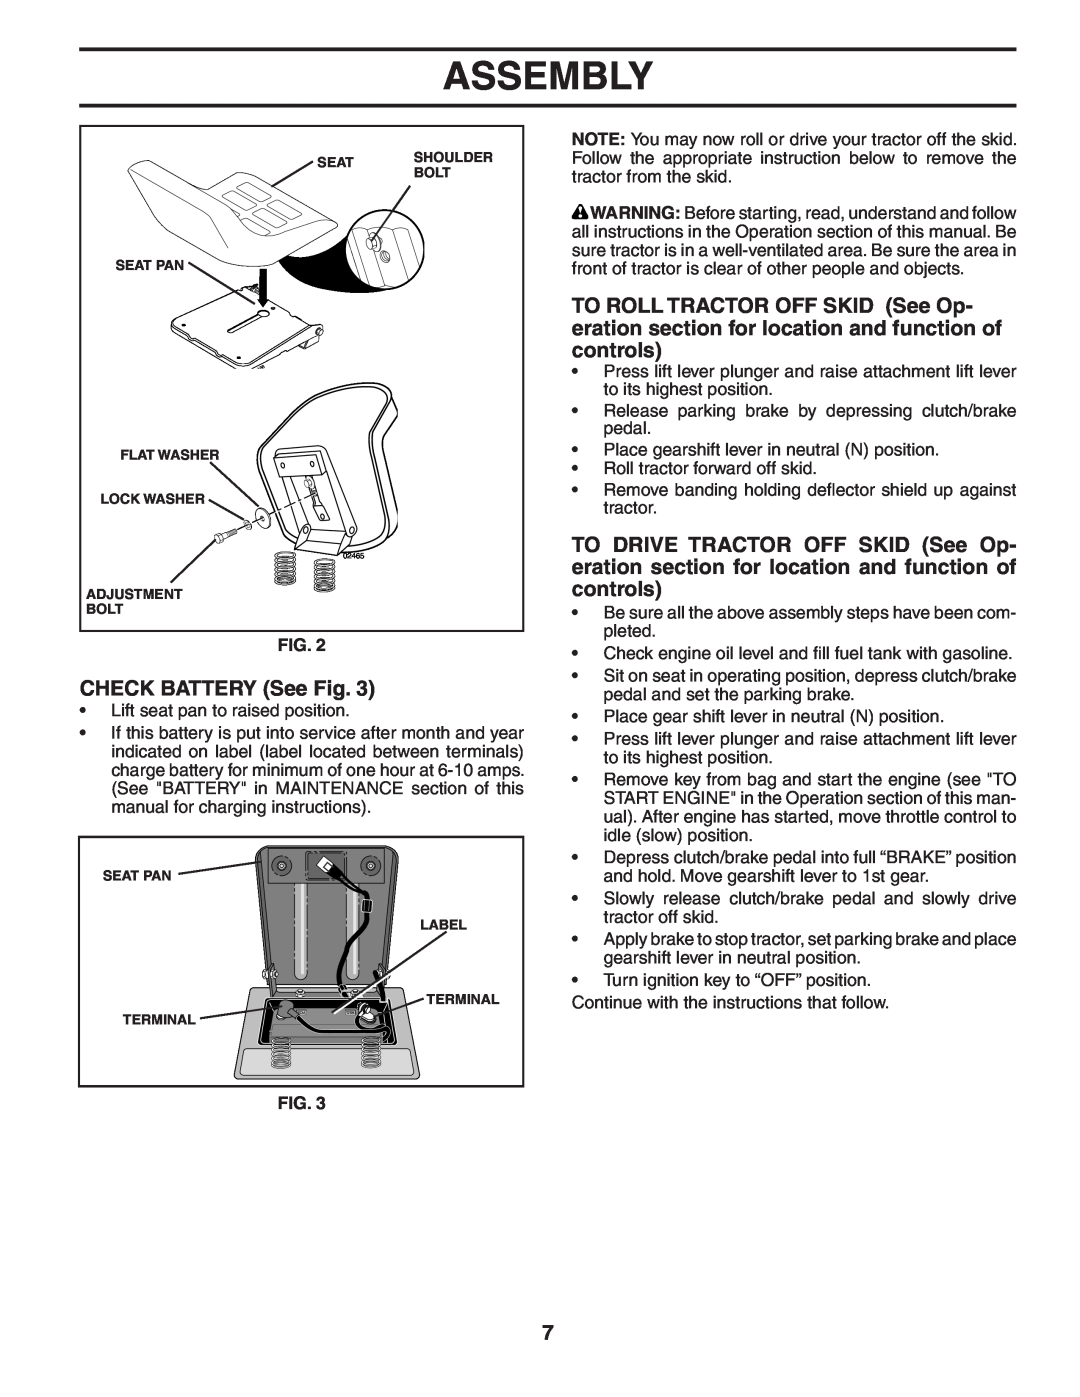 Poulan 403315 manual CHECK BATTERY See Fig, Assembly 